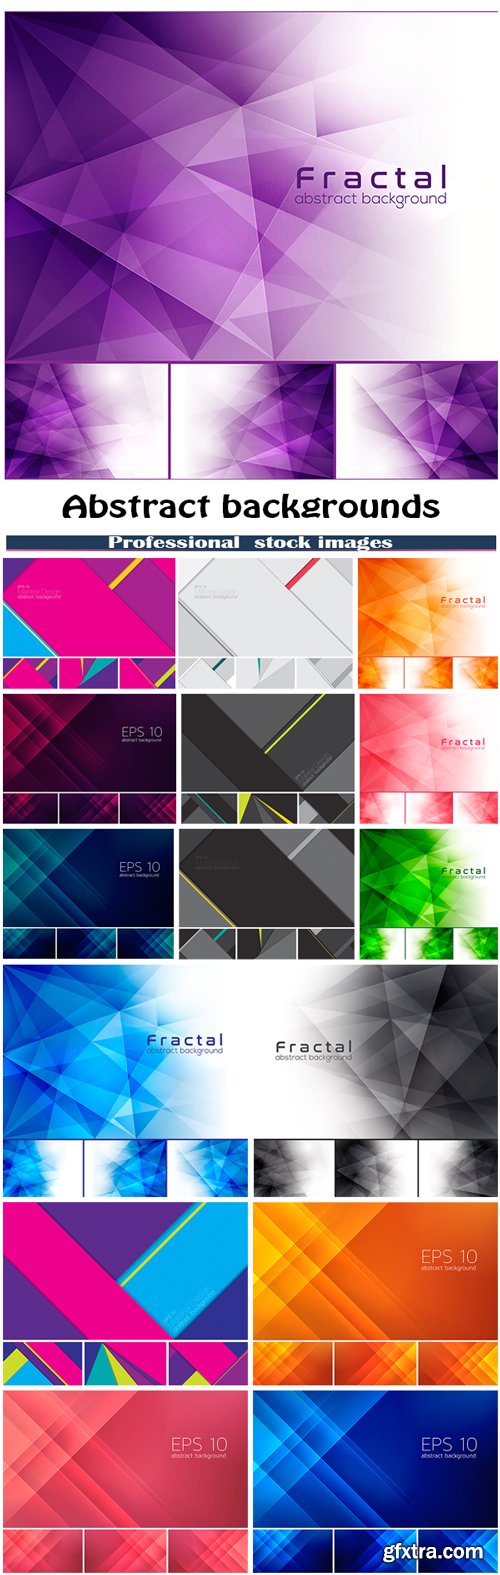 Fractal, stripes and material design abstract background